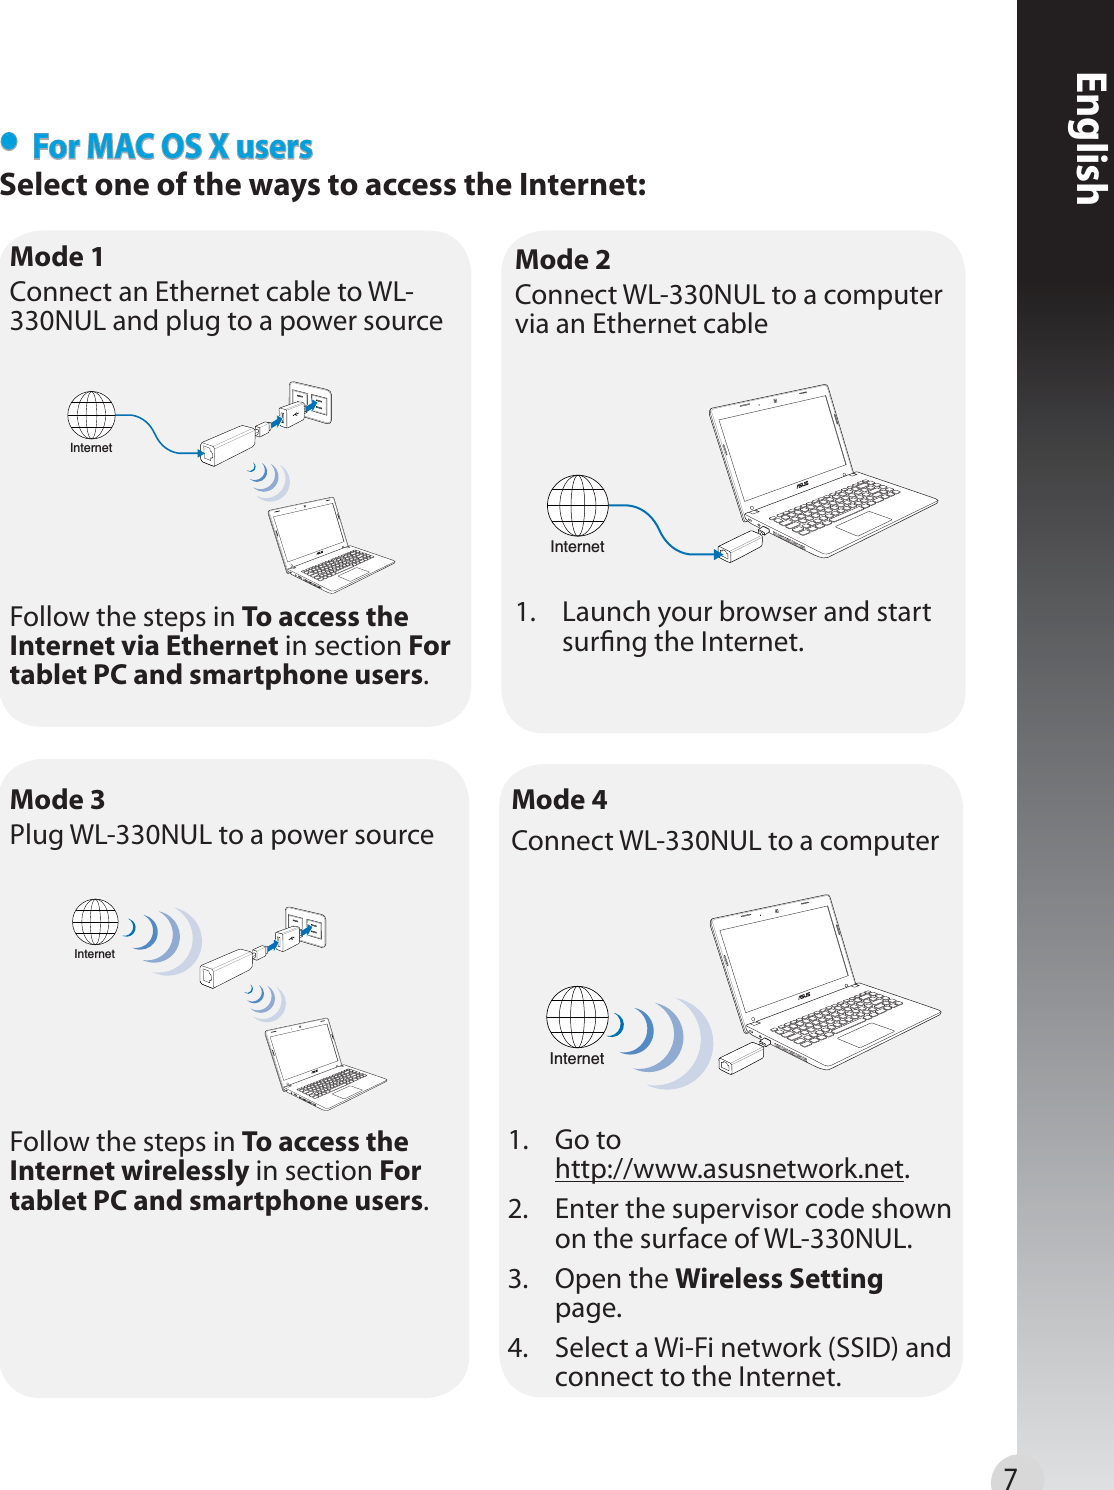 7Mode 2 Connect WL-330NUL to a computer via an Ethernet cableInternet1.  Launch your browser and start surng the Internet.Mode 3 Plug WL-330NUL to a power sourceMode 4 Connect WL-330NUL to a computerInternetInternetFollow the steps in To access the Internet wirelessly in section For tablet PC and smartphone users.1.  Go to  http://www.asusnetwork.net.2.  Enter the supervisor code shown on the surface of WL-330NUL.3. Open the Wireless Setting page.4.  Select a Wi-Fi network (SSID) and connect to the Internet.•  For MAC OS X usersSelect one of the ways to access the Internet:Mode 1 Connect an Ethernet cable to WL-330NUL and plug to a power sourceInternetFollow the steps in To access the  Internet via Ethernet in section For tablet PC and smartphone users.English